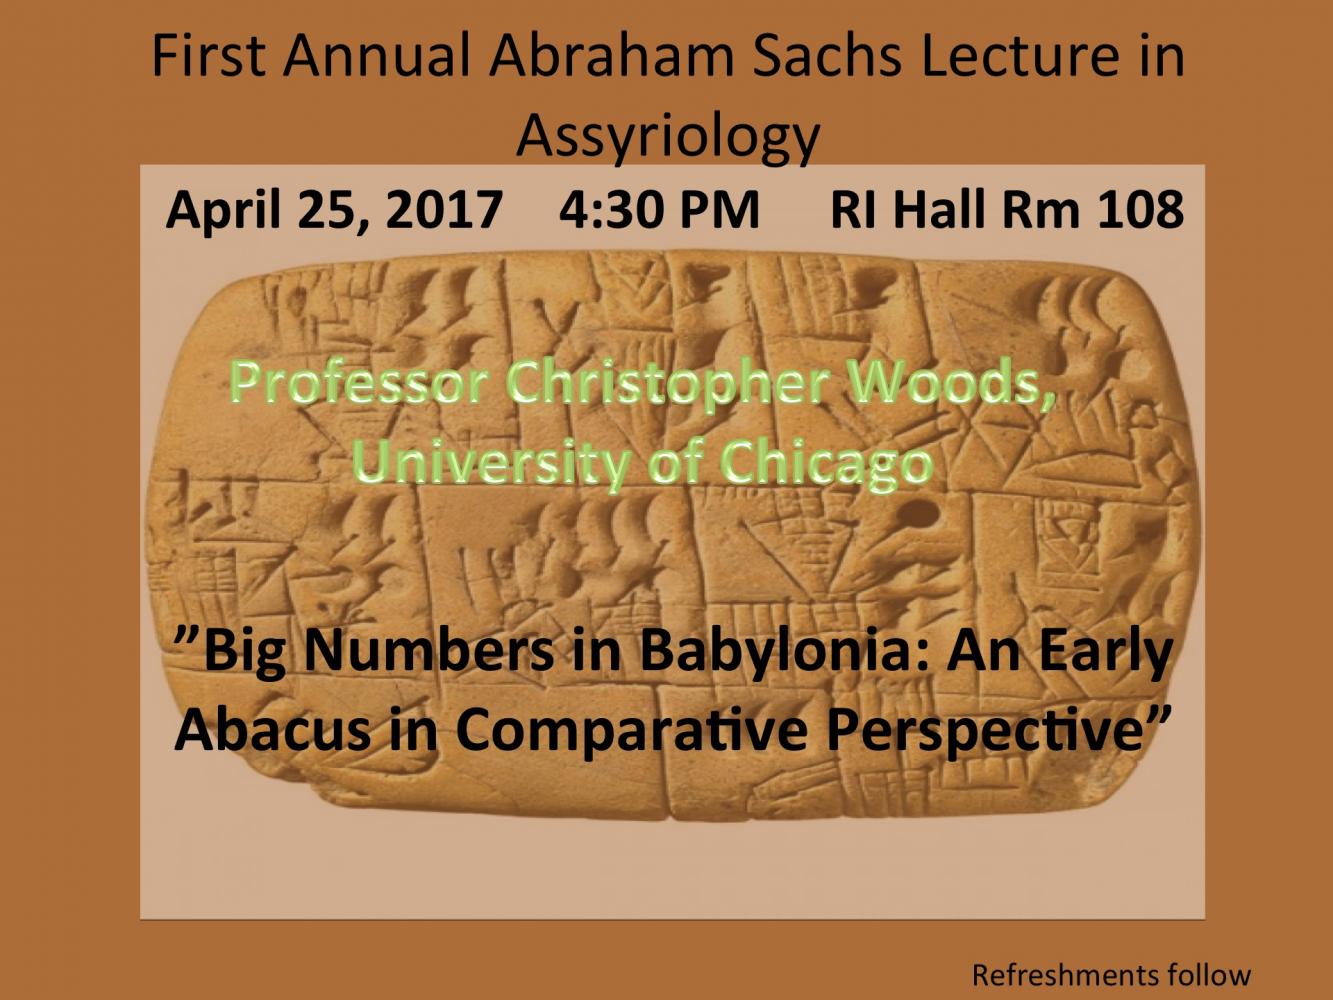 Poster of  the First Annual Abraham Sachs Lecture